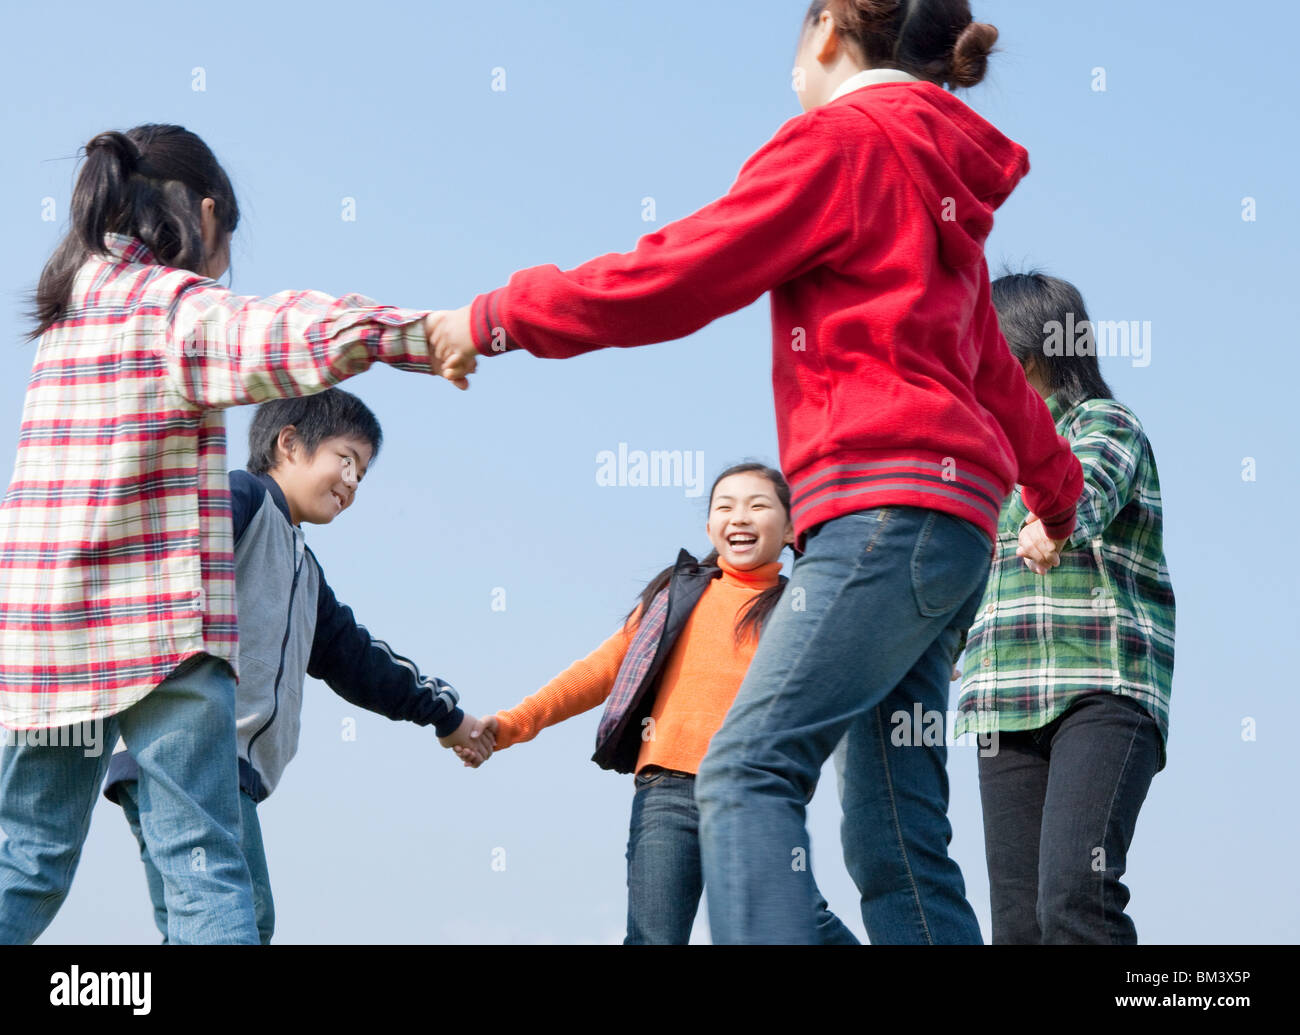 Boys and Girls Holding Hands, Going Around in Circle Stock Photo